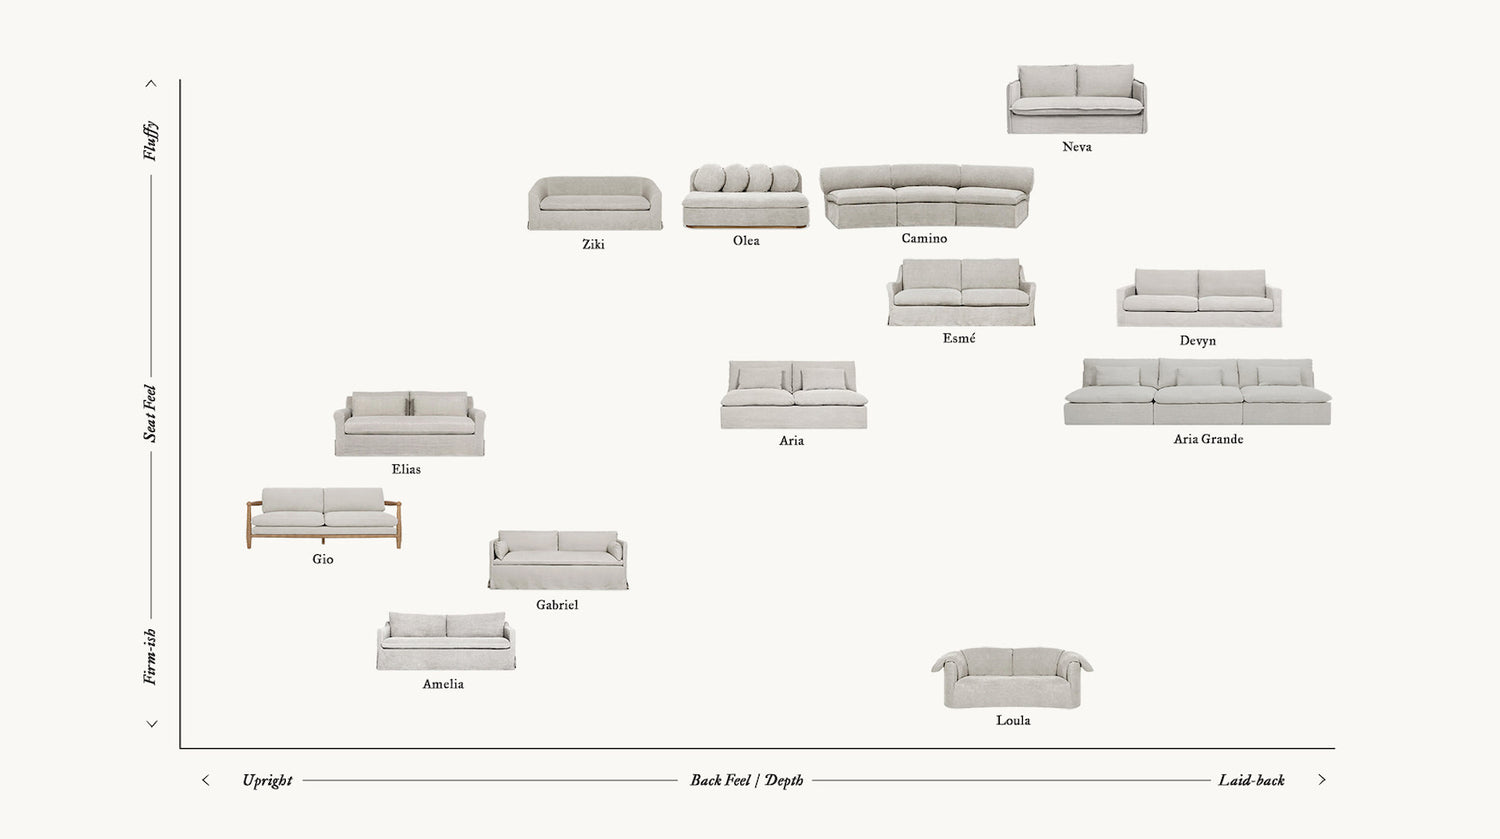 A chart comparing seat feel and back feel of each Sixpenny collection. Neva is shown as one of the most laid-back and fluffy, whereas Amelia is one of the most upright and firm.